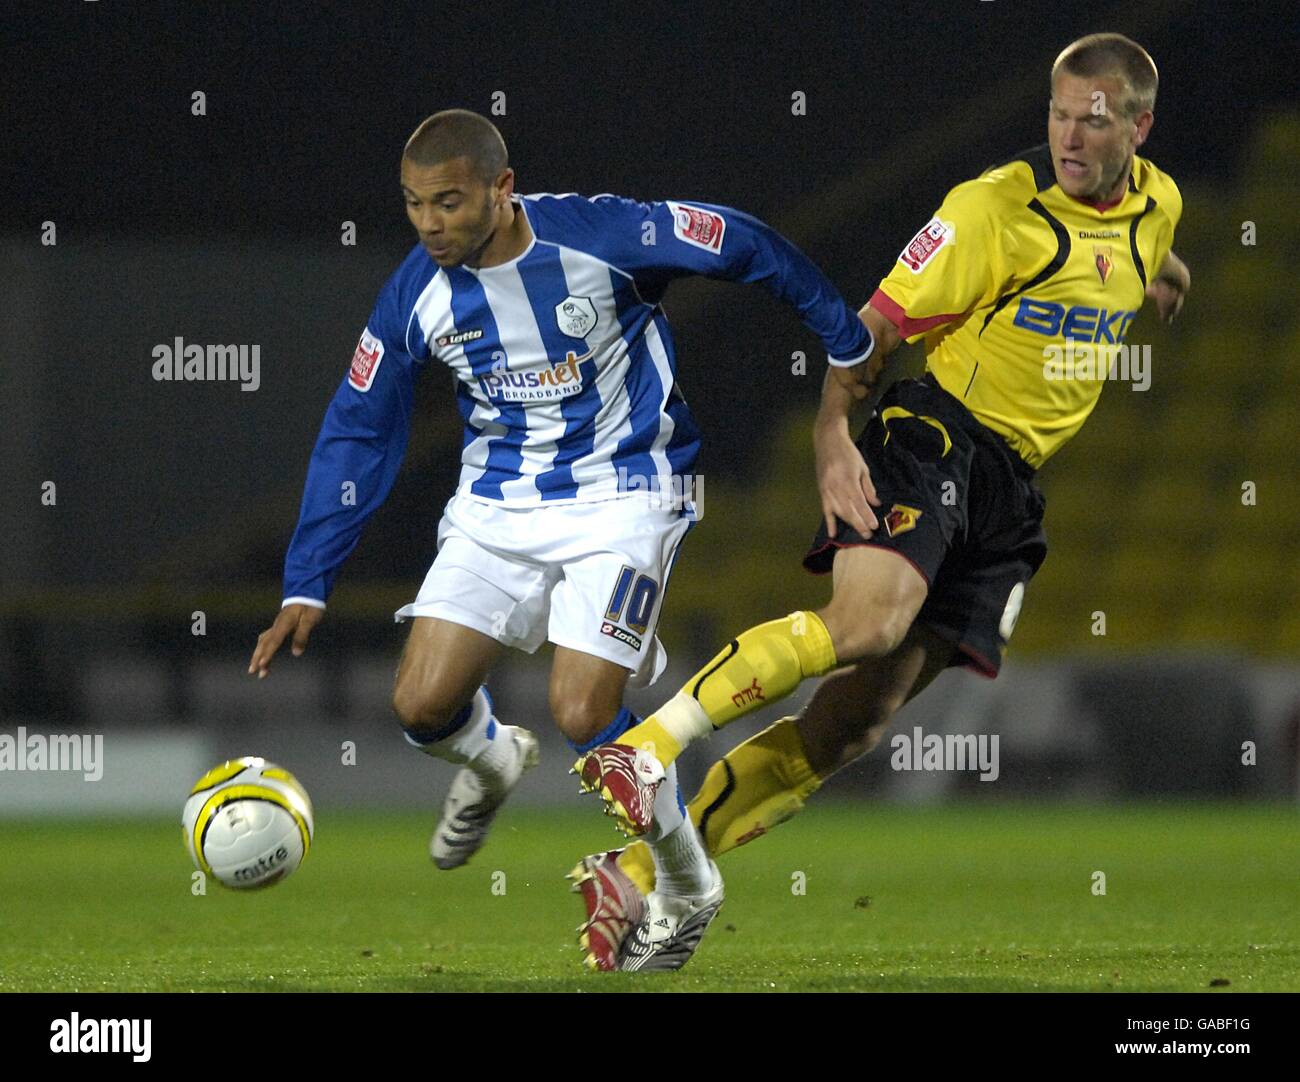 Soccer - Coca-Cola Football League Championship - Watford v Sheffield Wednesday - Vicarage Road Stadium. watford's Gavin Mahon and Sheffield Wednesday's Deon Burton battle for the ball Stock Photo